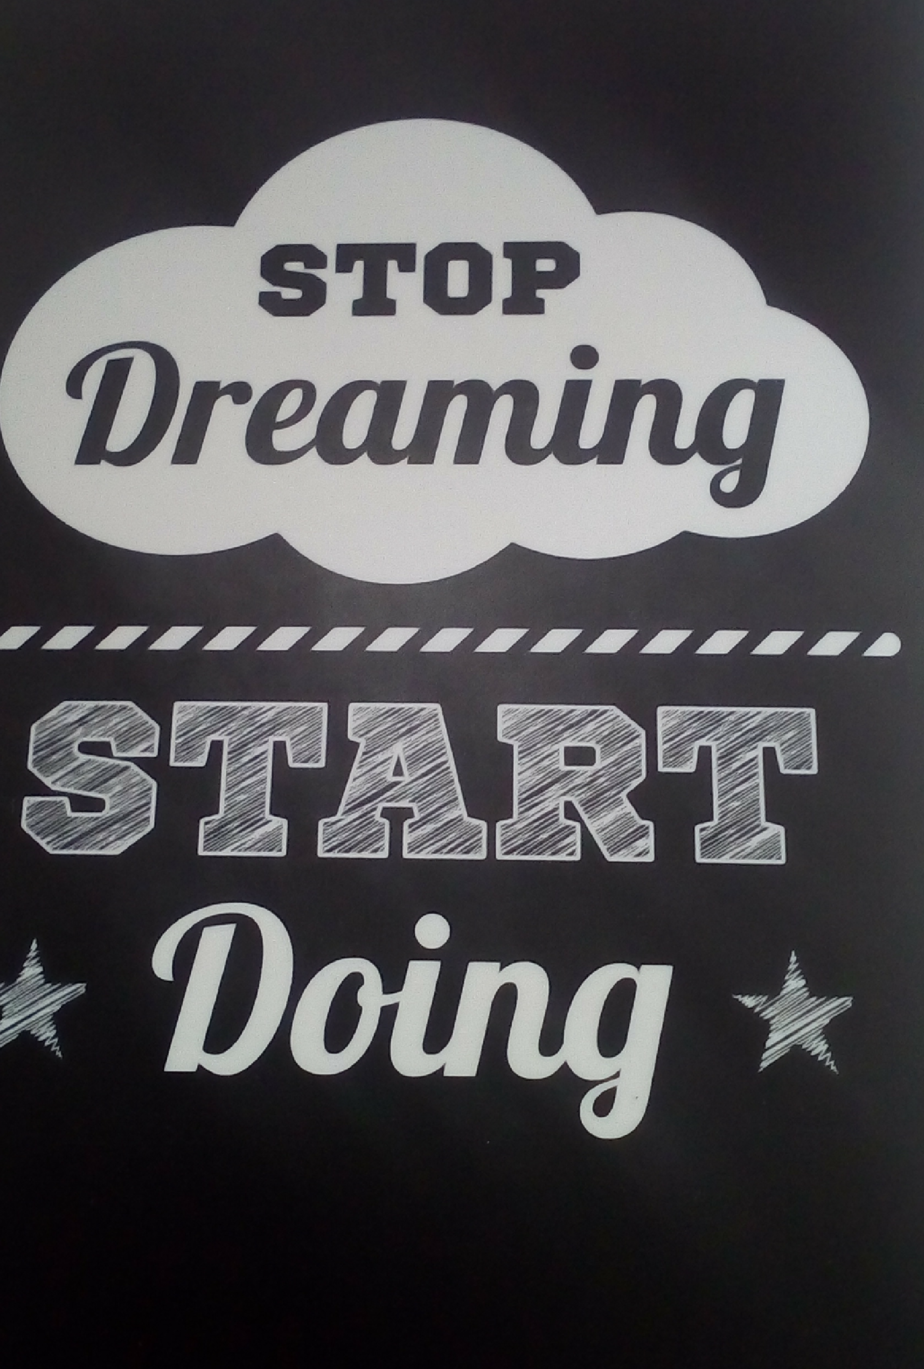 Stop dreaming and start doing.